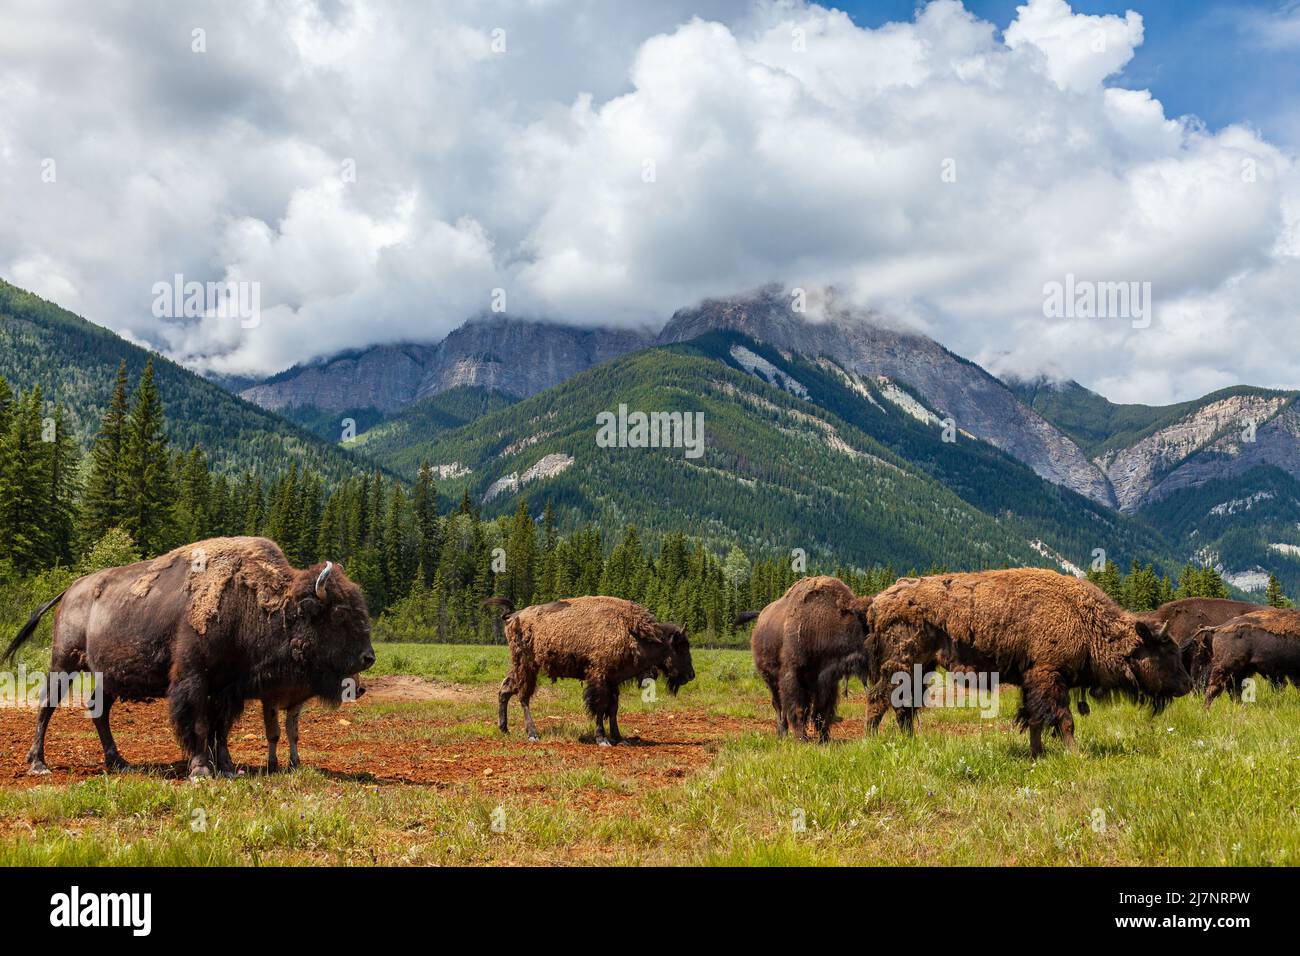 American Bison or Buffalo with calf and herd in a field surrounded by mountains Stock Photo